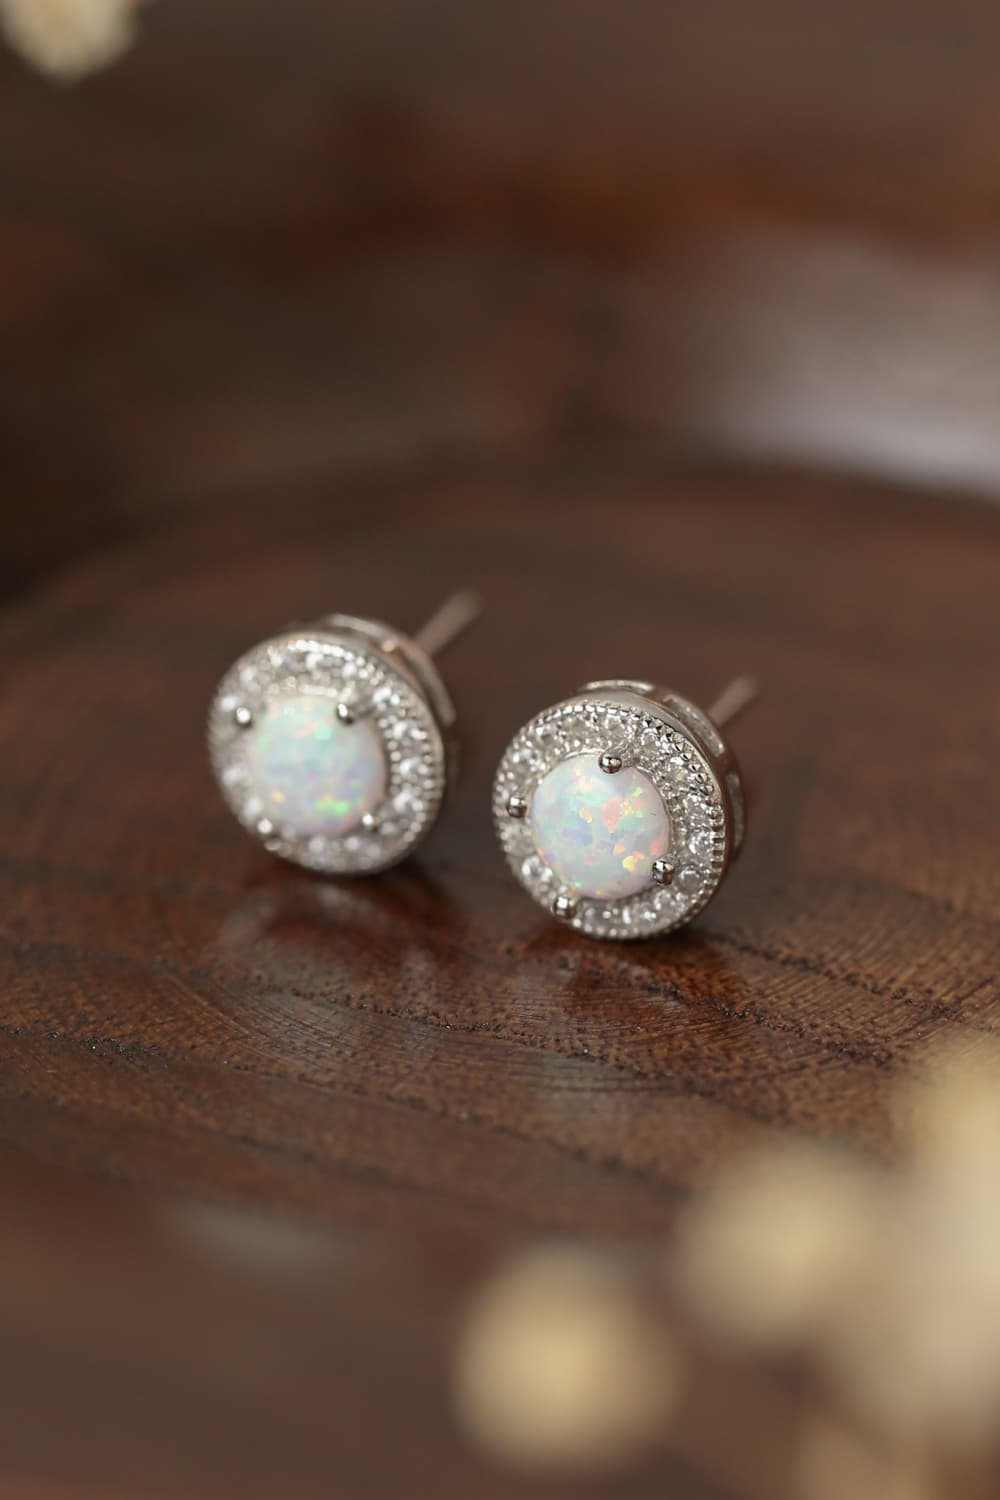 Opal 4-Prong Round Stud Earrings - Tophatter Shopping Deals - Electronics, Jewelry, Auction, App, Bidding, Gadgets, Fashion